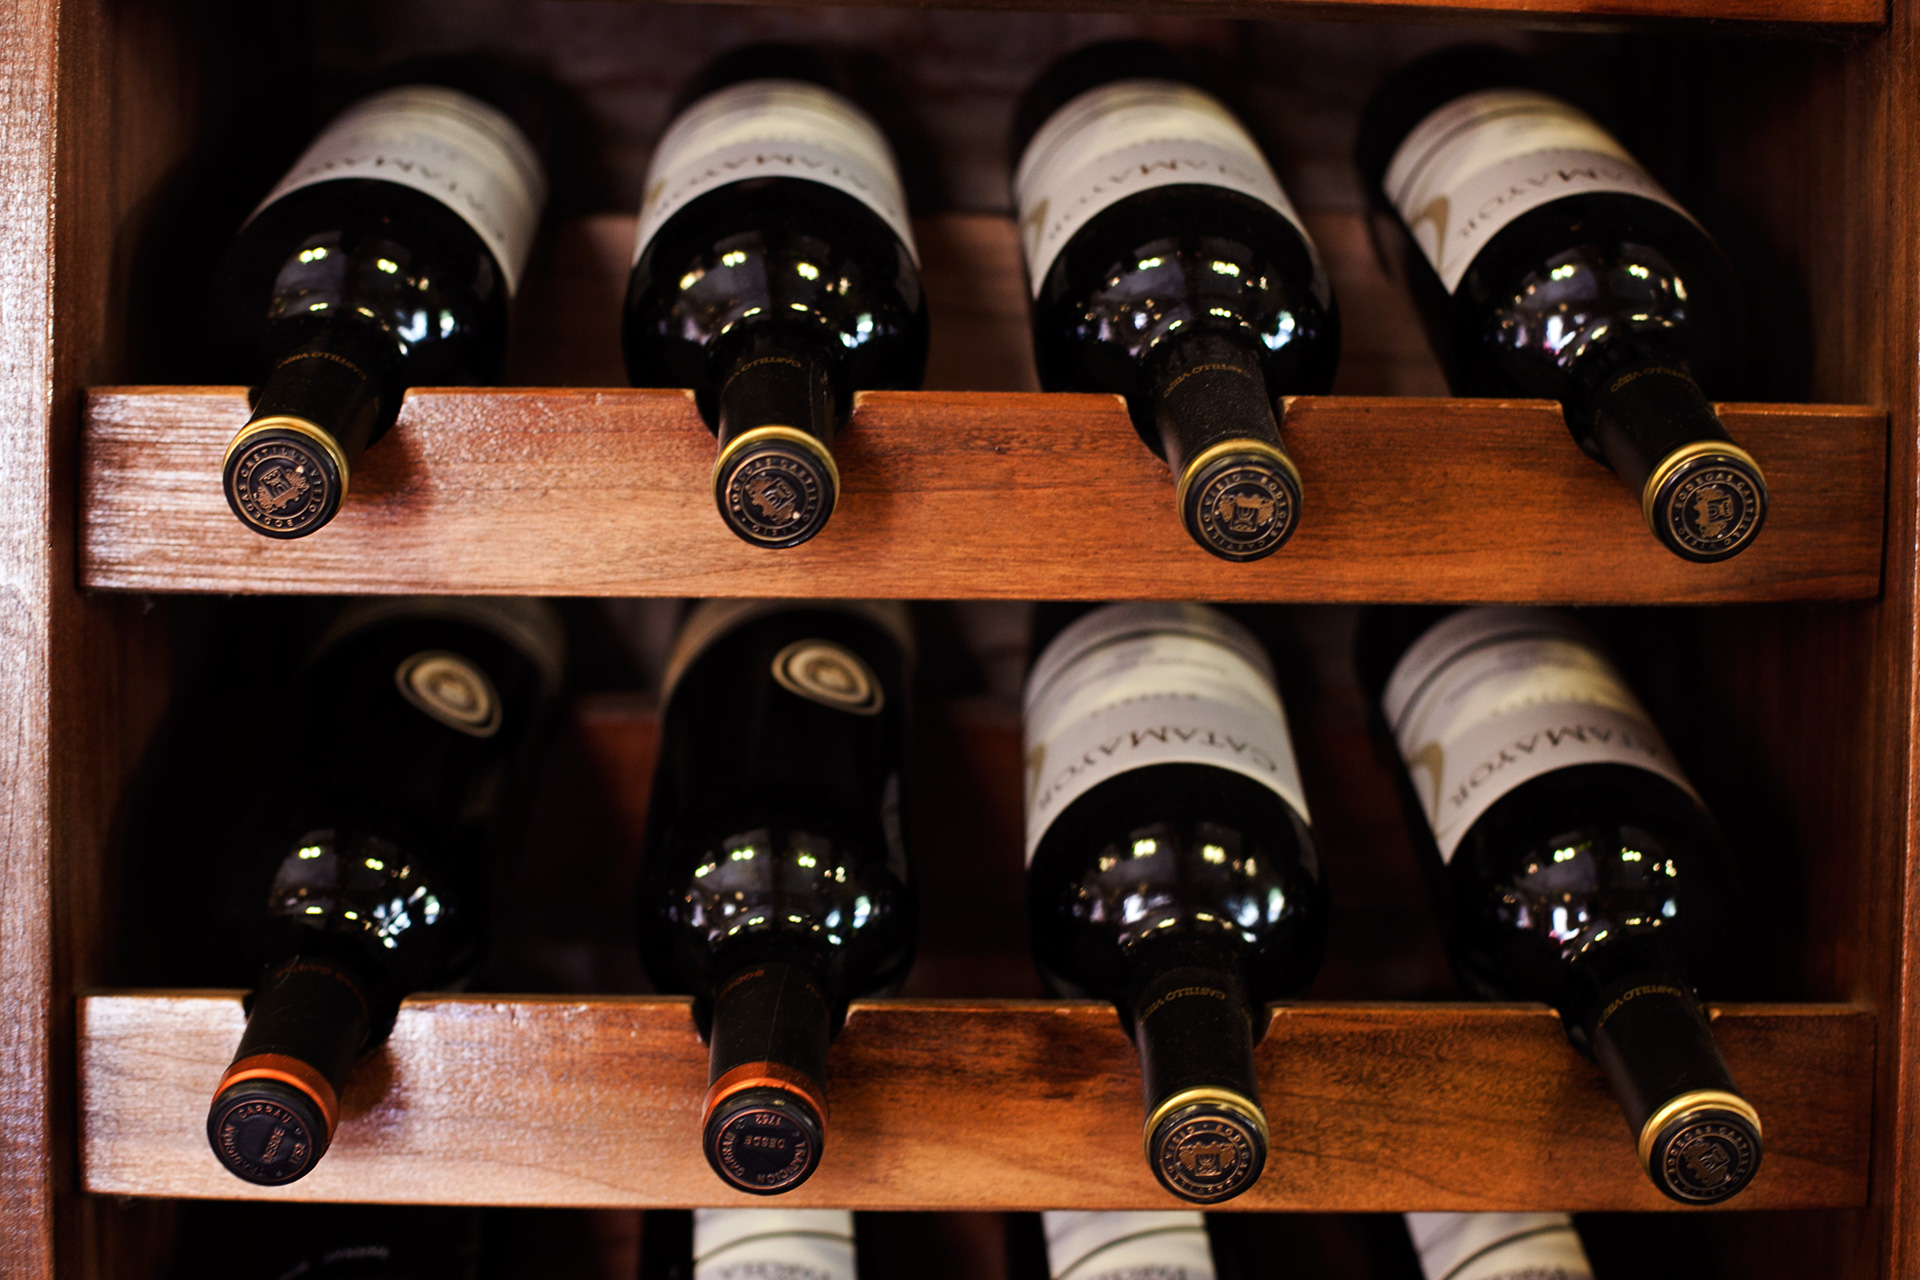 How to Build a Wine Rack – Easy to Follow Step-By-Step Guide